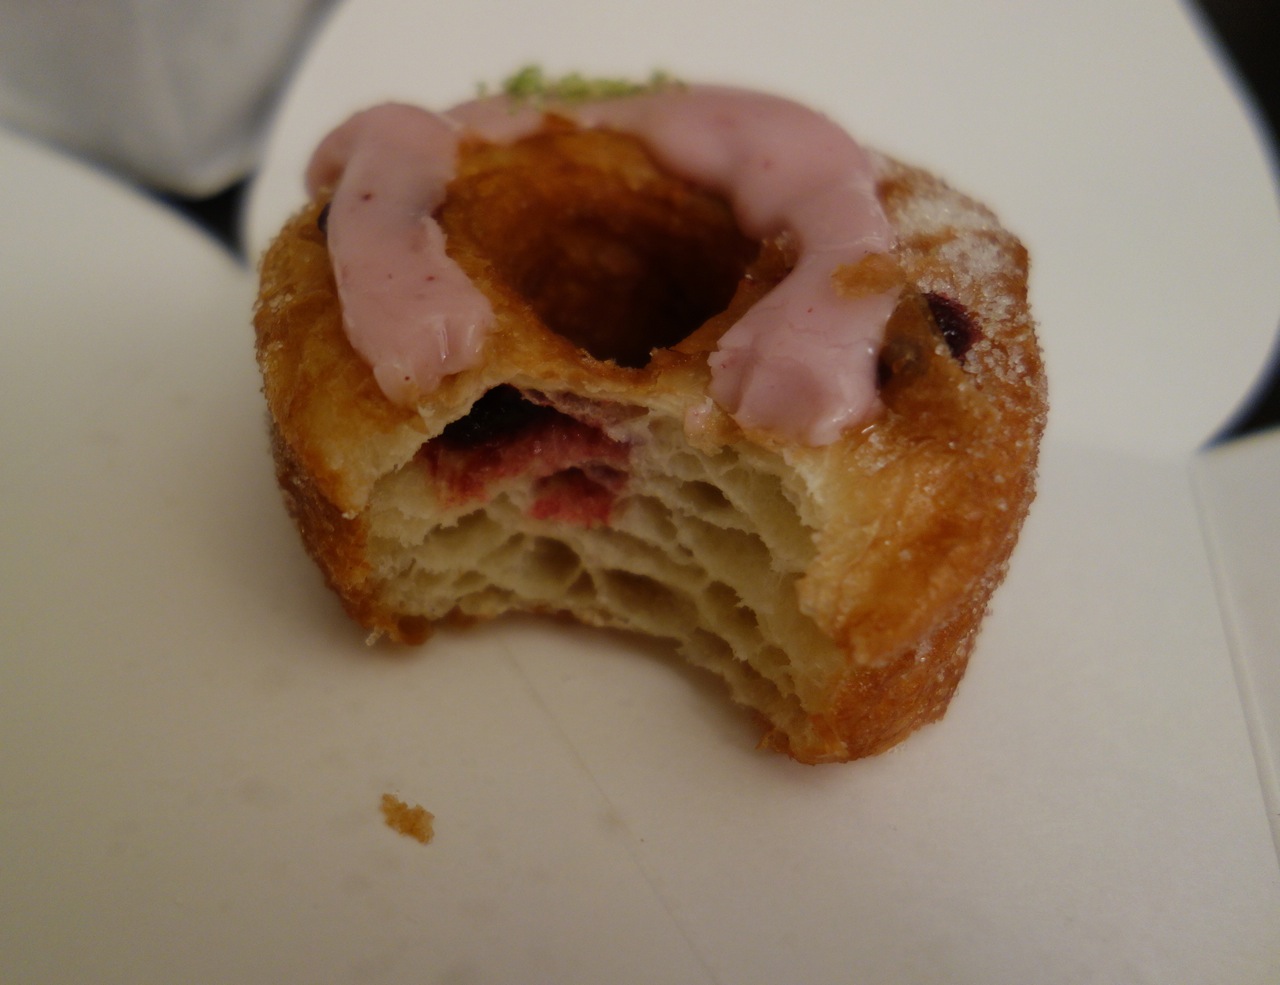 The cronut. July's flavor is blackberry lime.